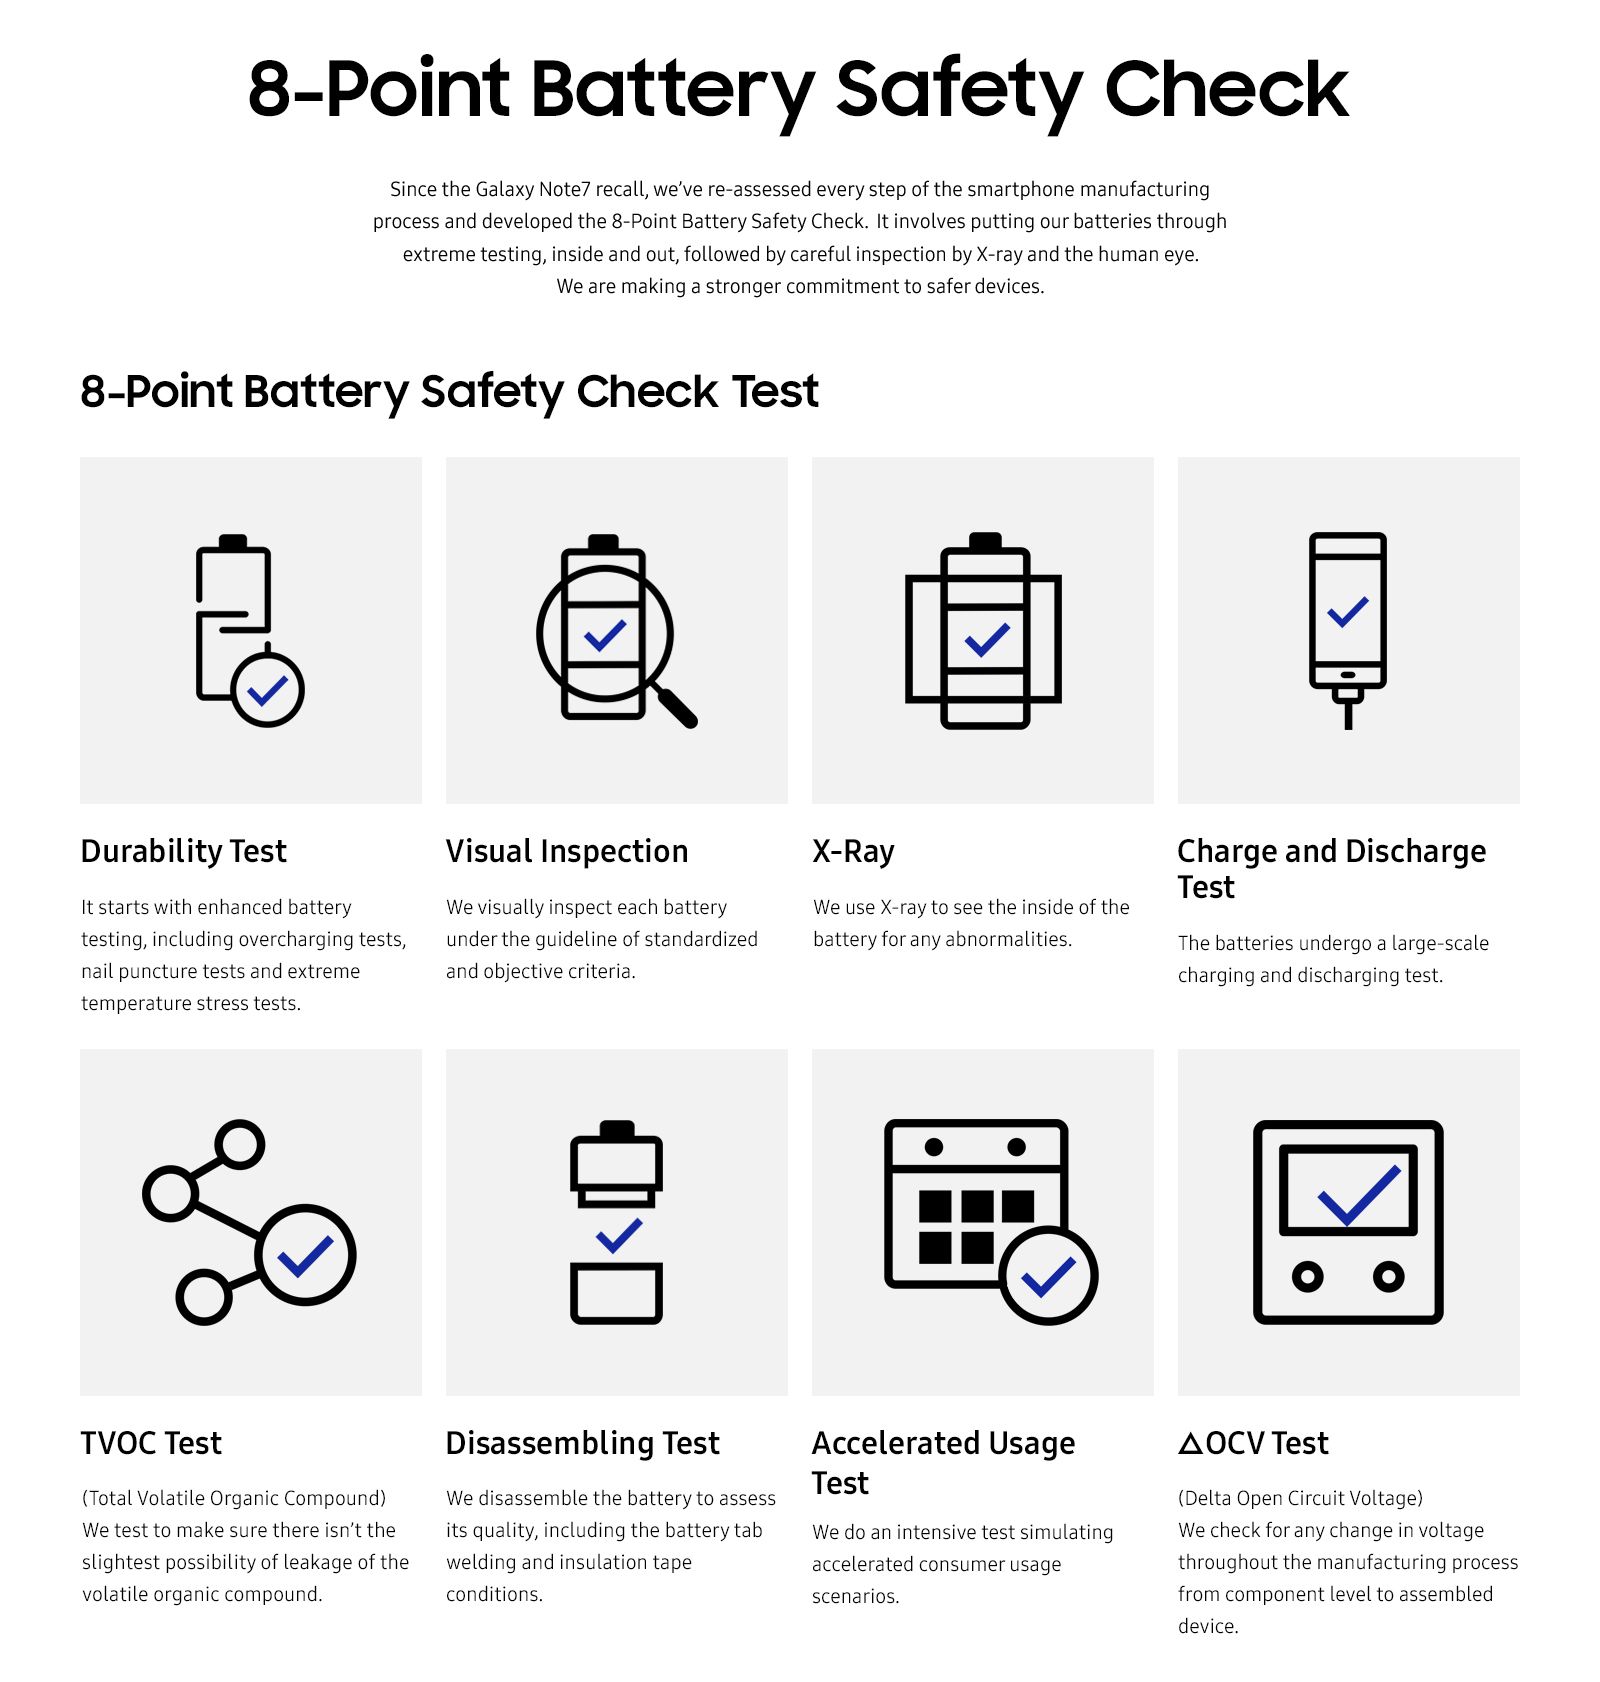 samsung confirms note 7 batteries to blame implements new safety checks image 2